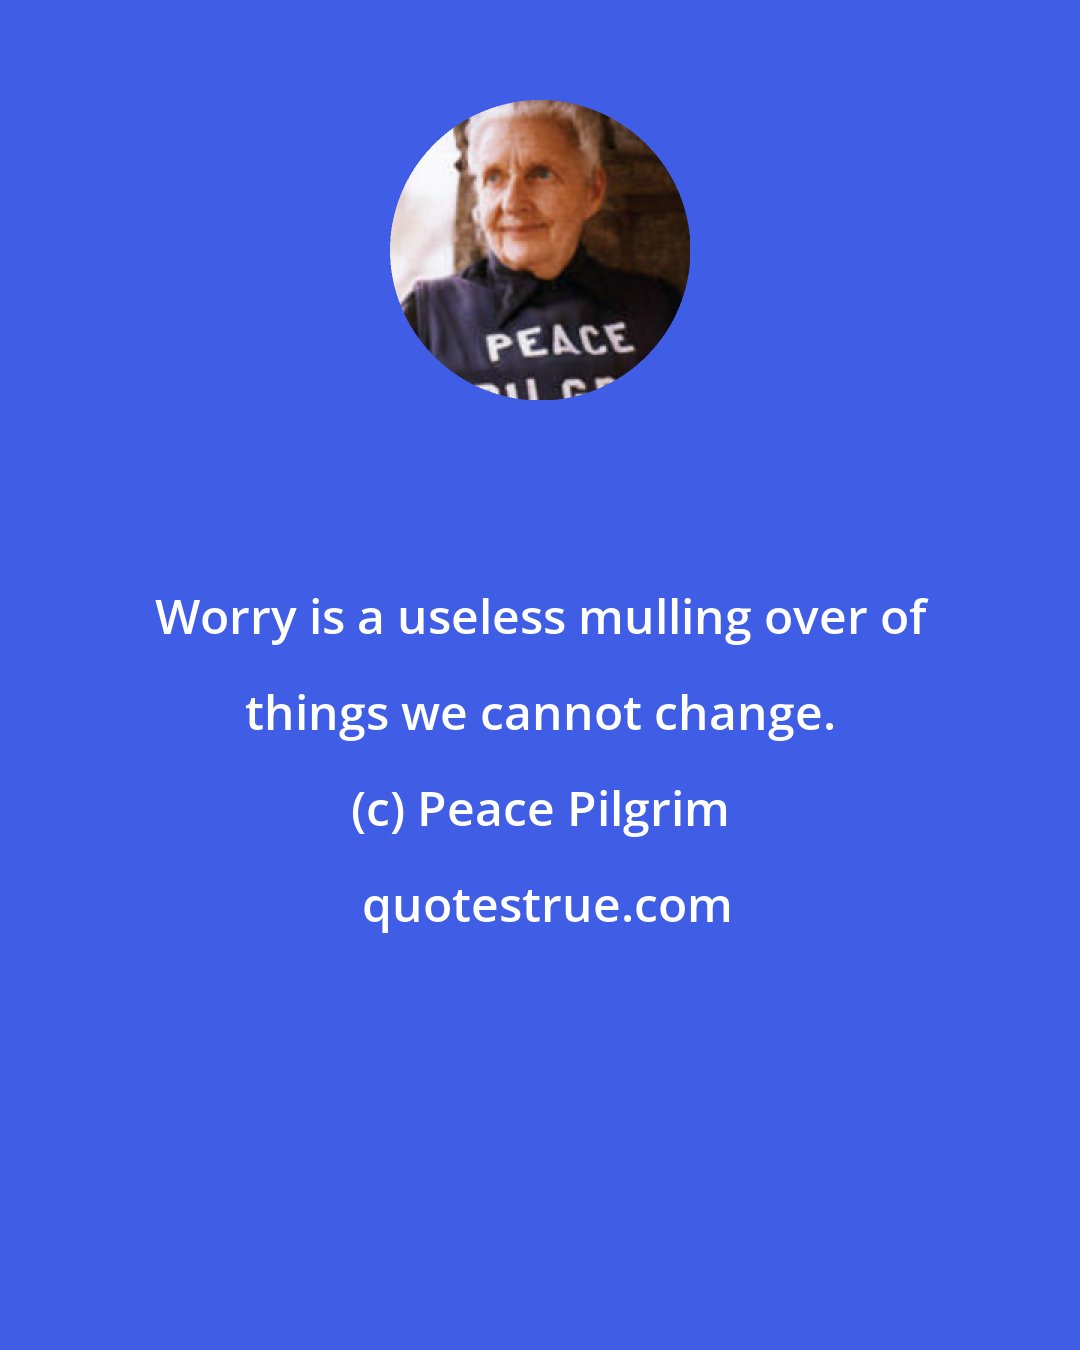 Peace Pilgrim: Worry is a useless mulling over of things we cannot change.